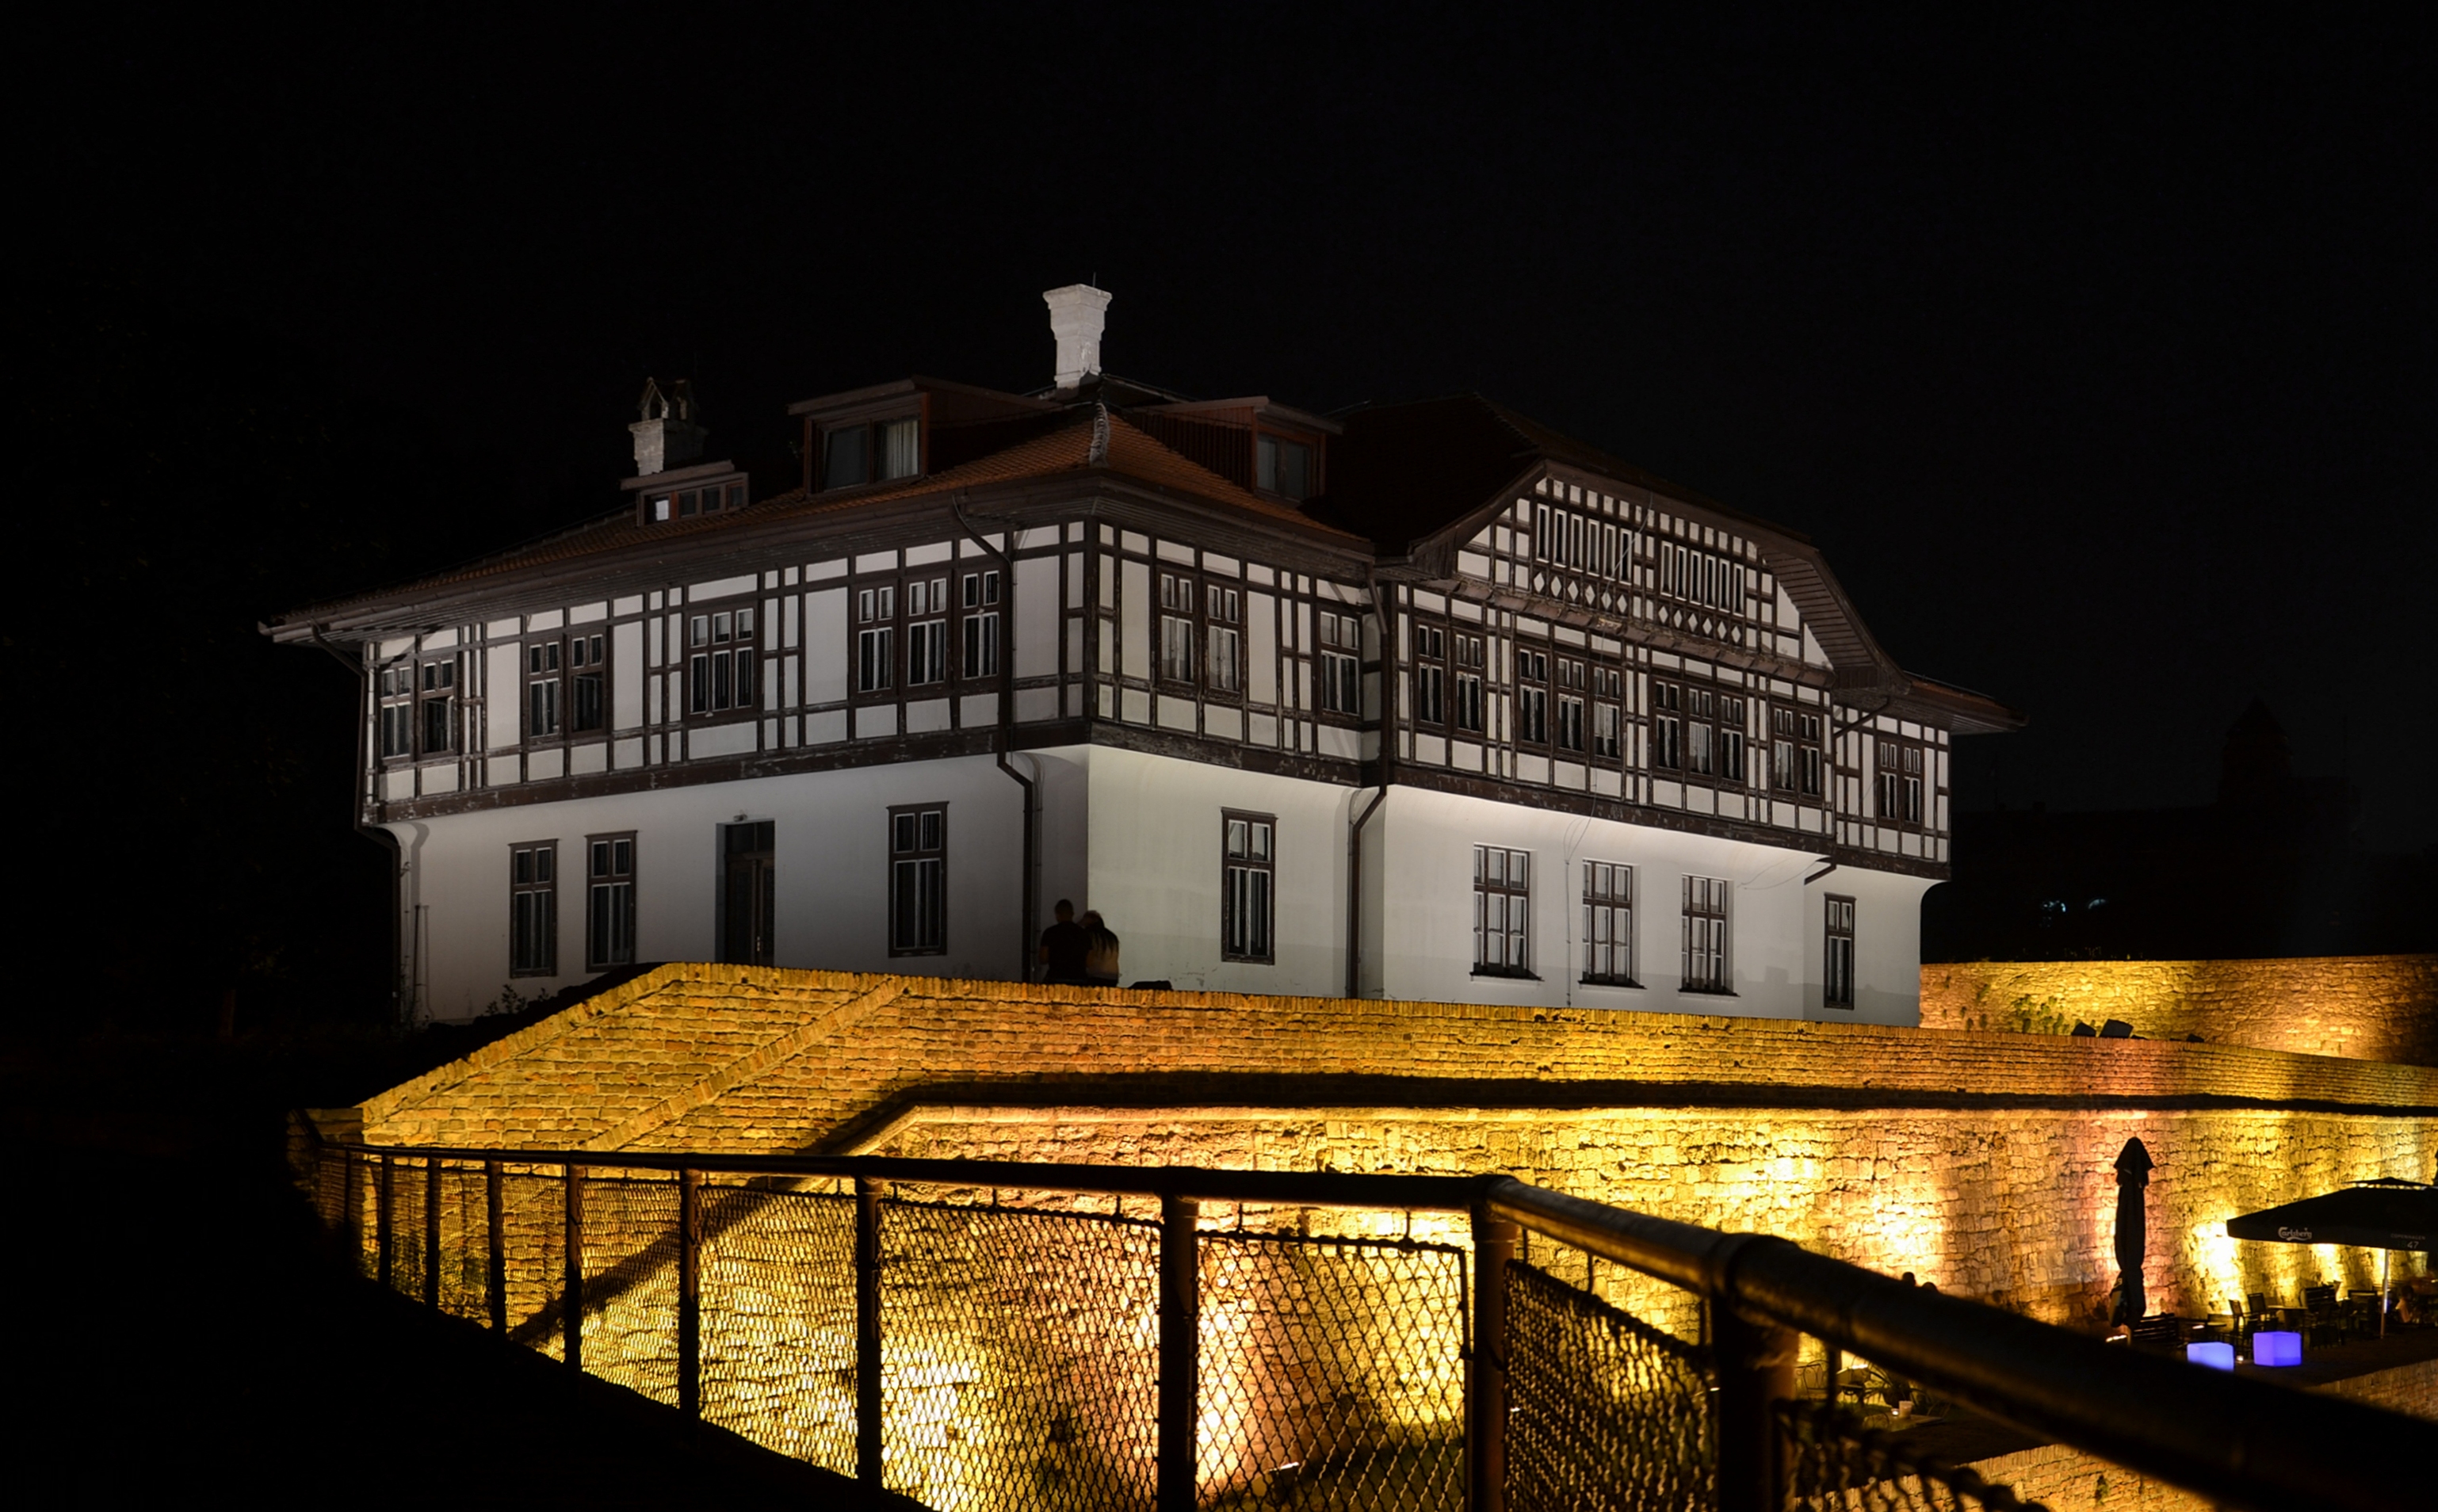 Cultural Heritage Preservation Institute of Belgrade by night